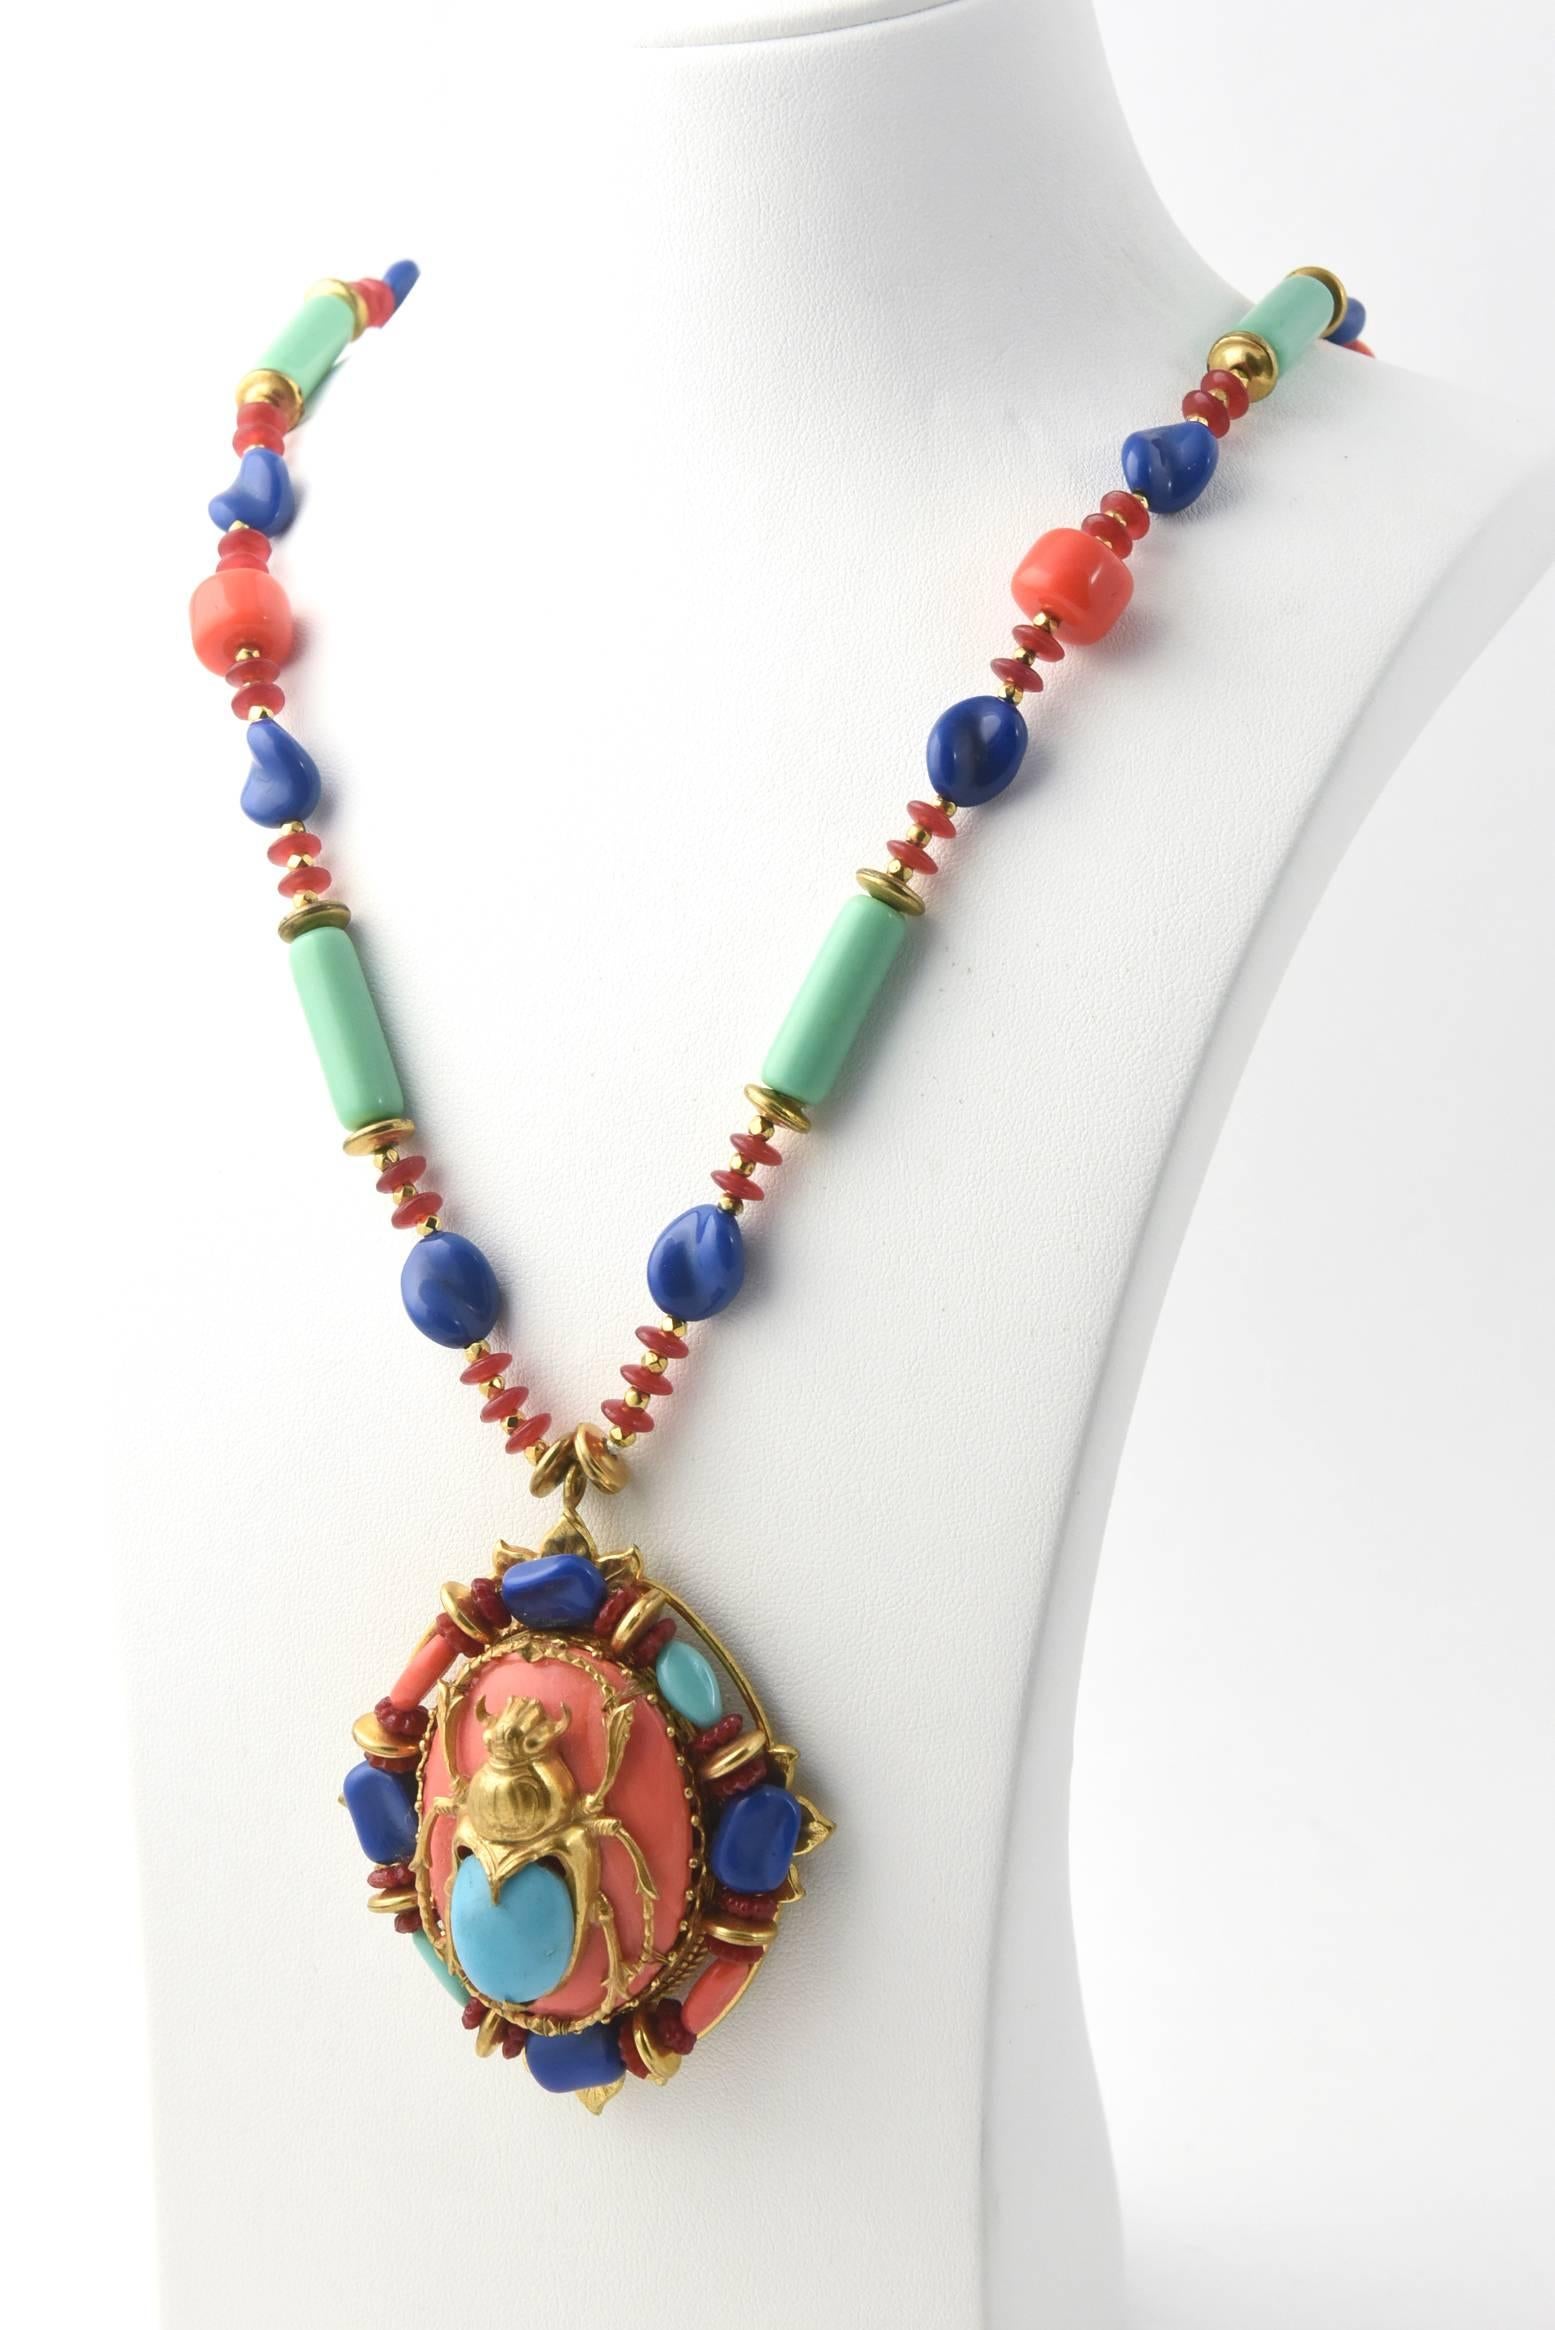 This large scarab pendant and matching necklace was made by Larry Vrba for Miriam Haskell in the early 1970s. Vrba was the head designer for Haskell and created this for the Egyptian collection inspired by the King Tut Exhibition between